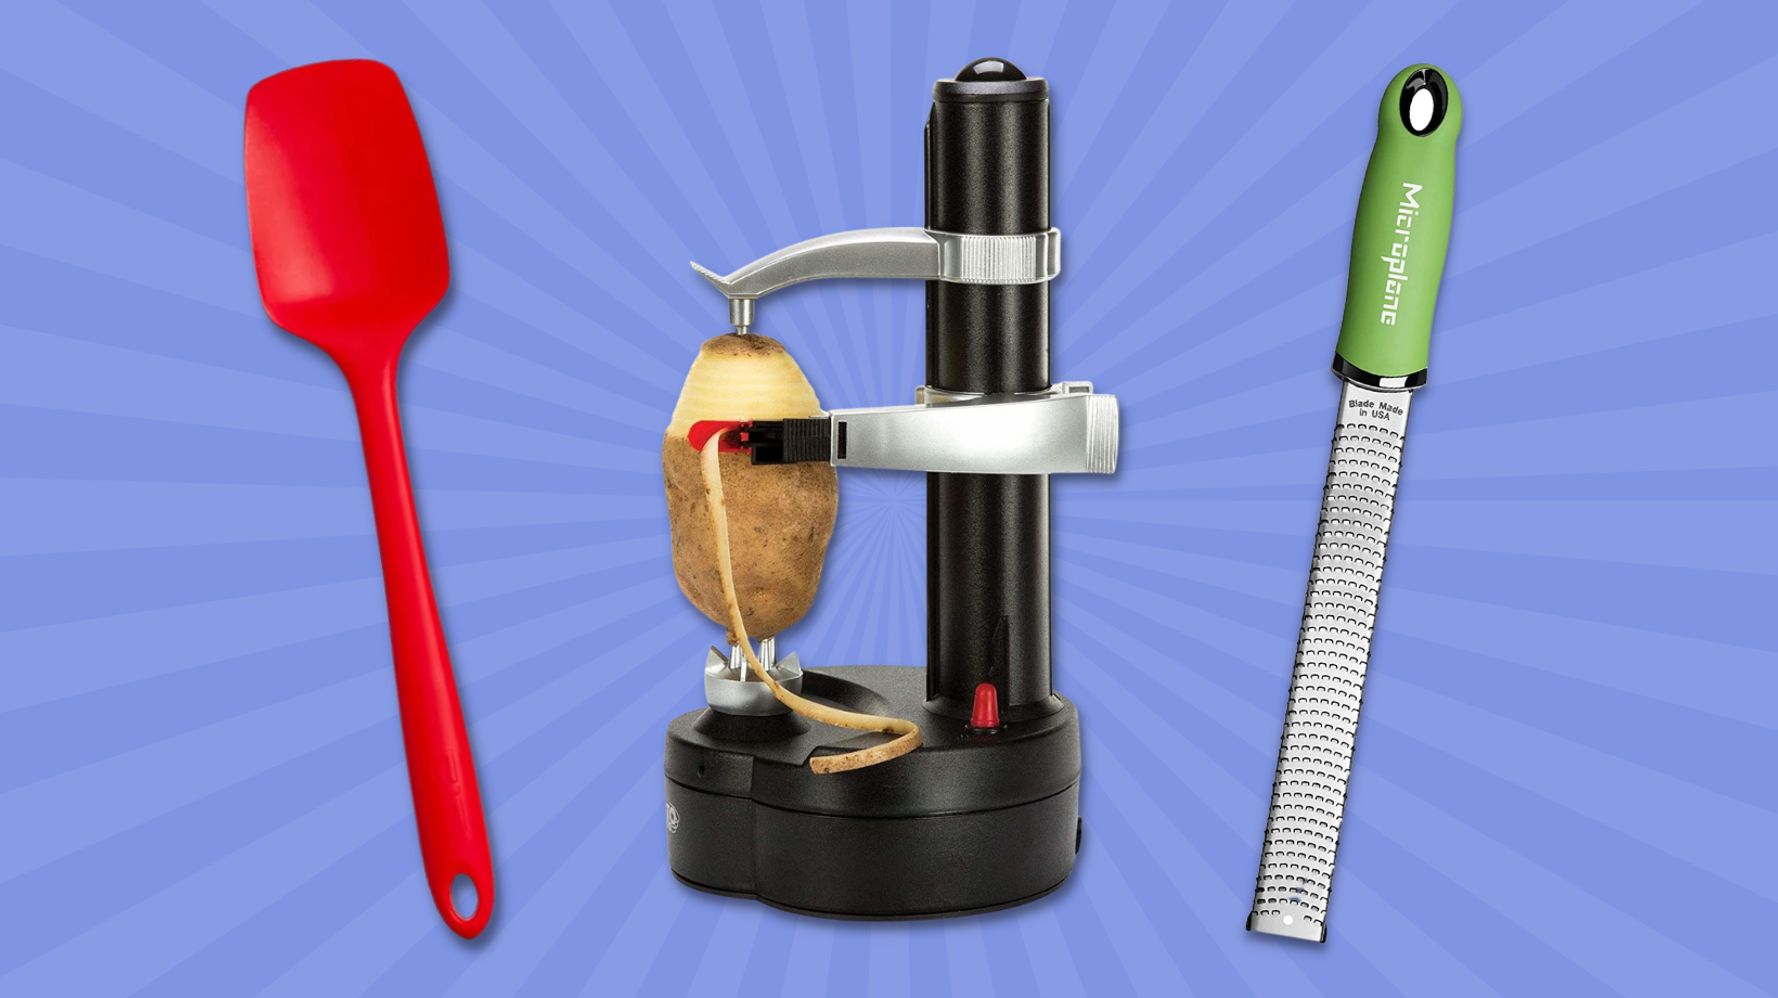 12 Most Mistreated Kitchen Tools, According to Experts